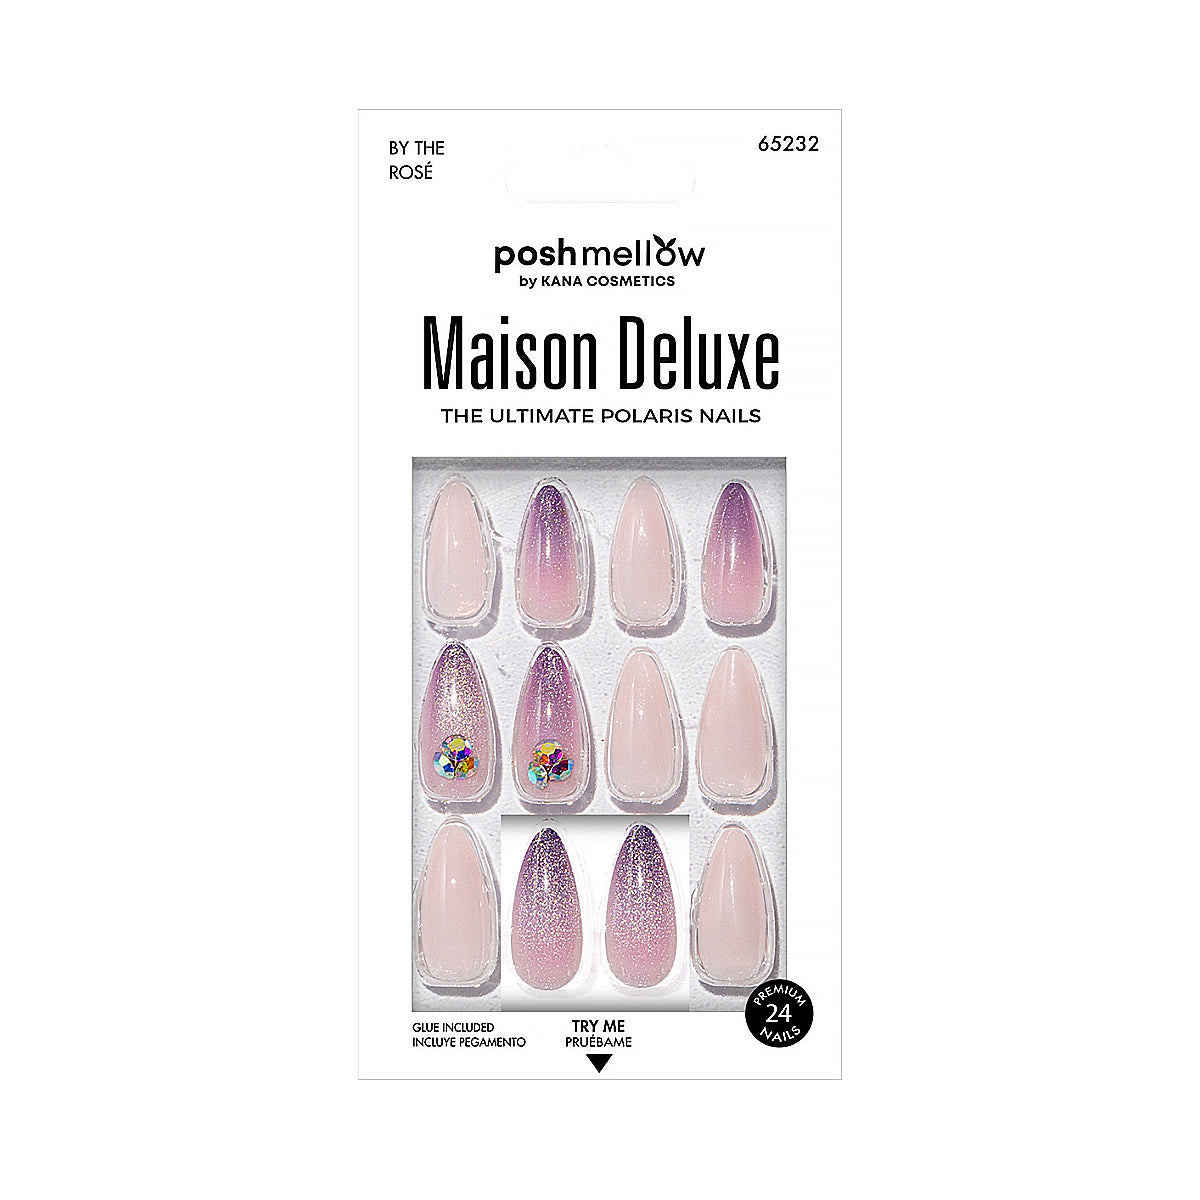 Maison Deluxe Press-On Nails By the Rose